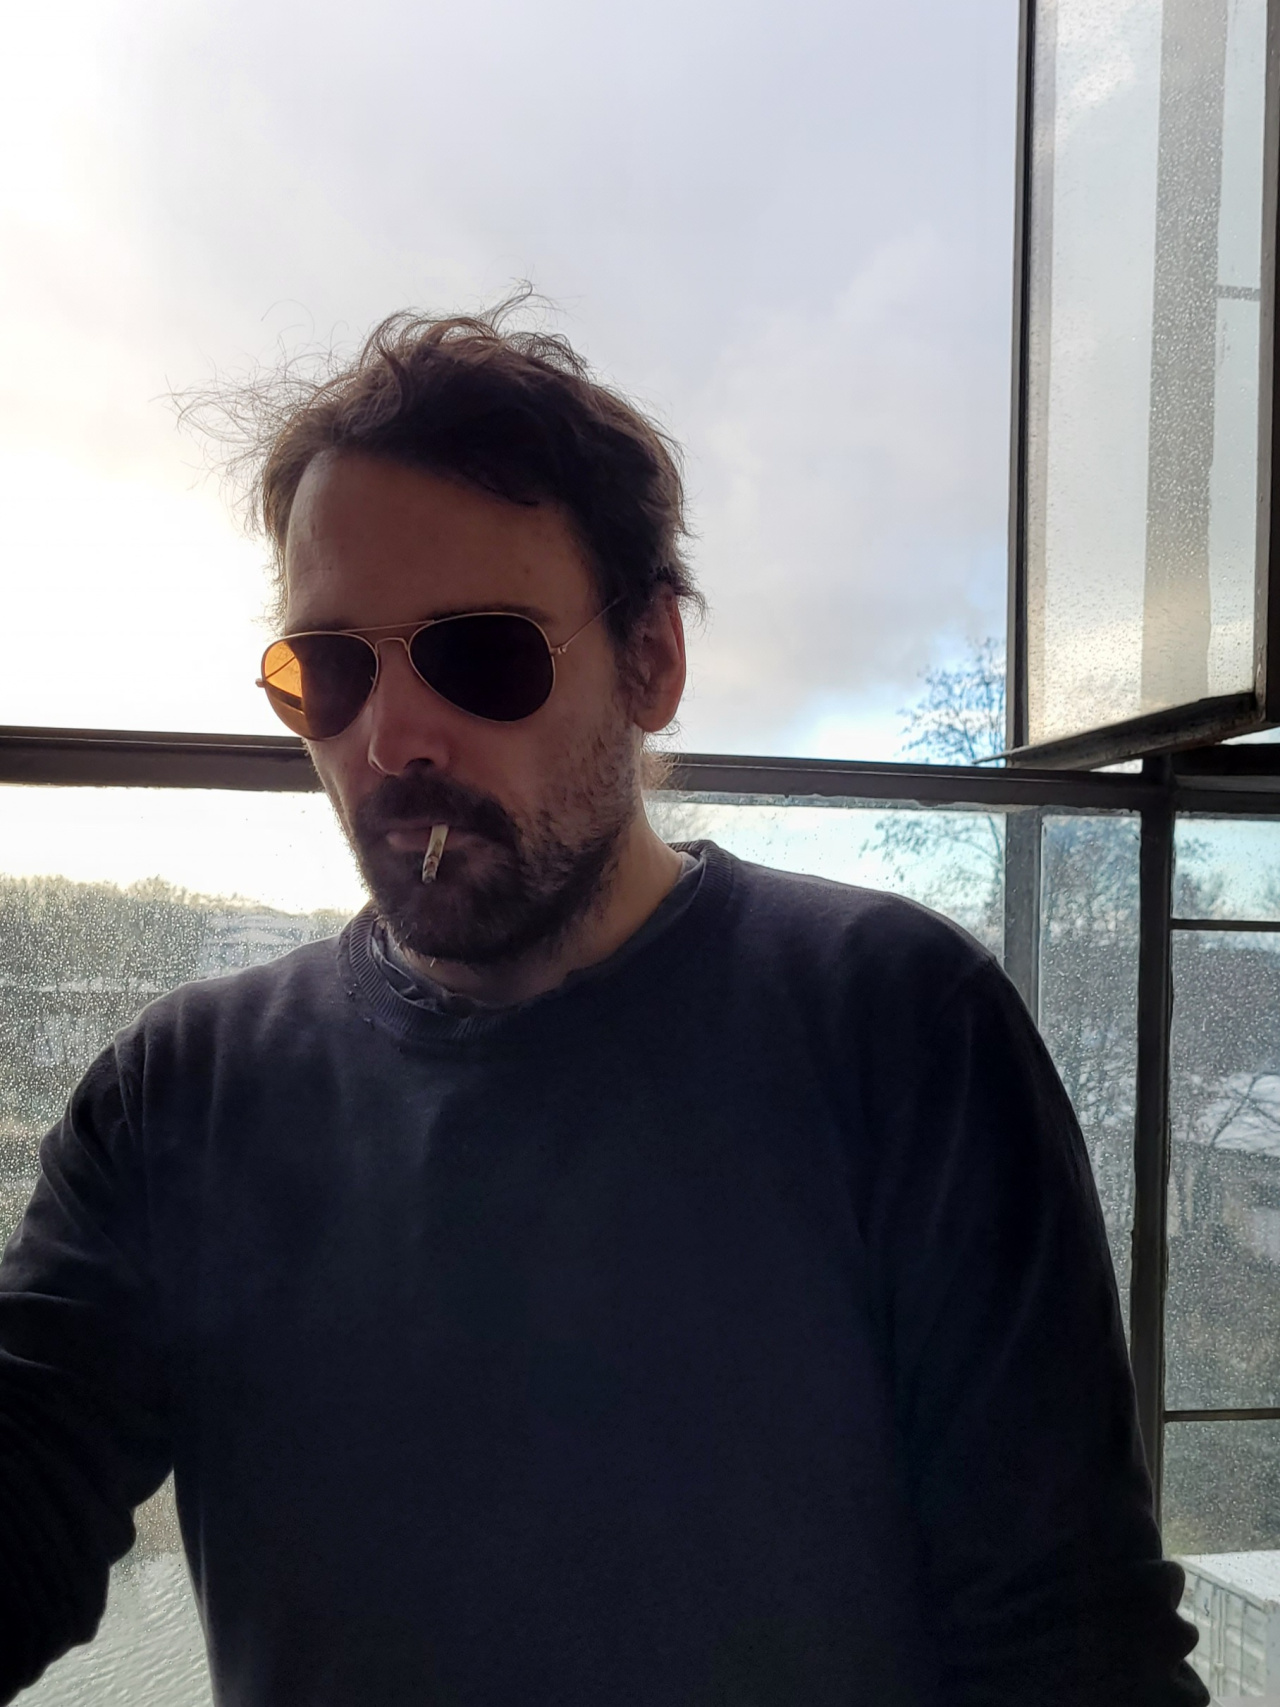 Christian Schlaeffer smoking in front of a window pane wearing a black sweater and sunglasses